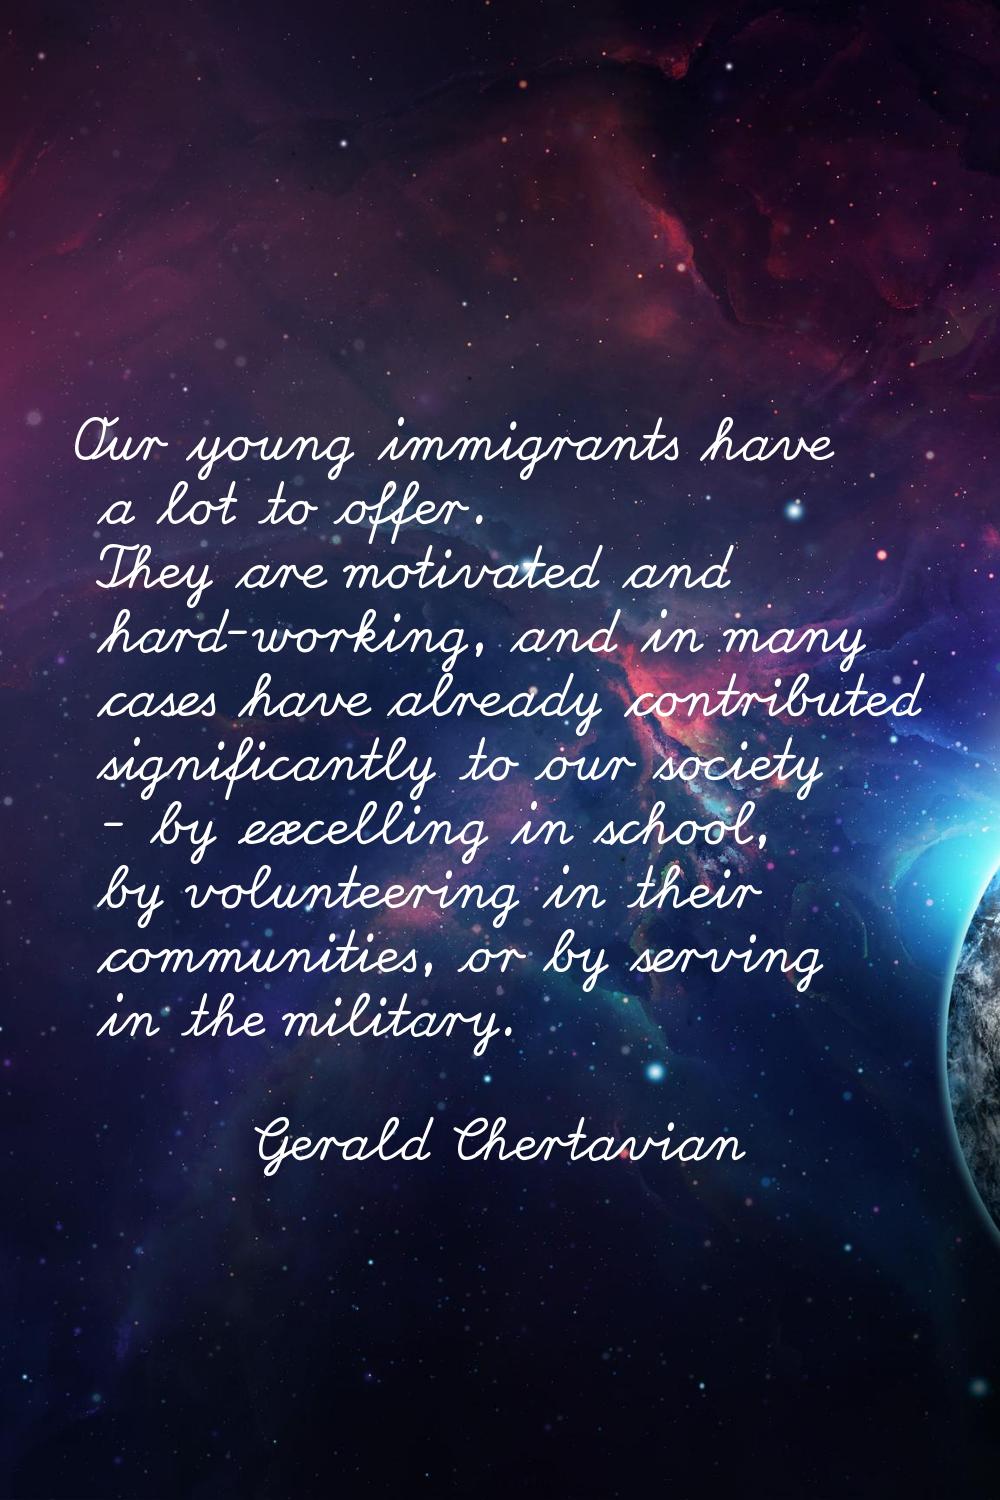 Our young immigrants have a lot to offer. They are motivated and hard-working, and in many cases ha